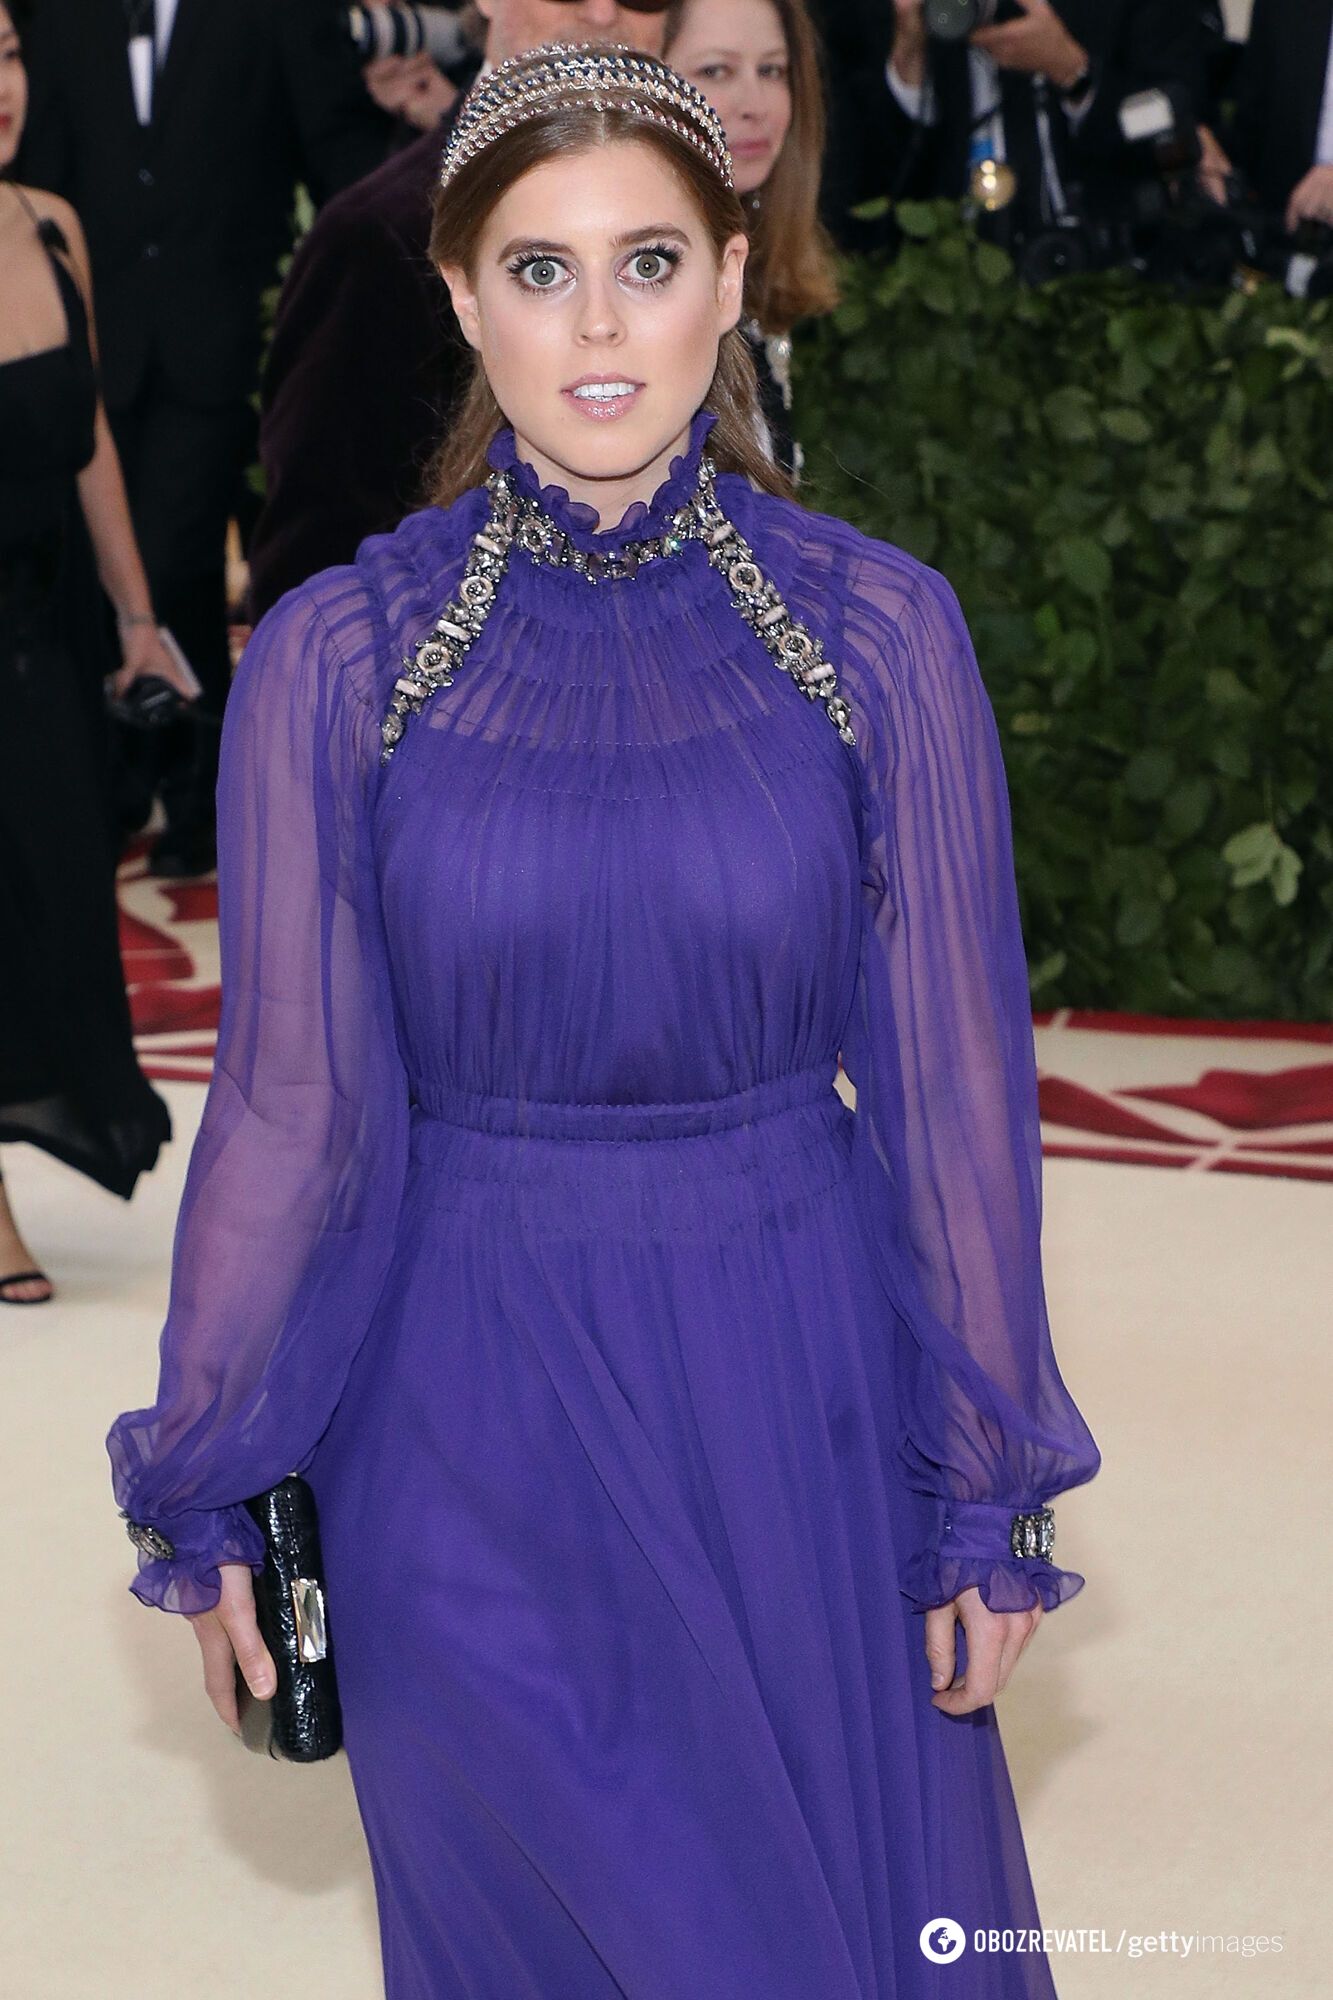 Princess Beatrice started a fashion trend at the Met Gala: after her, Kate Middleton and other royals wore this item. Photo